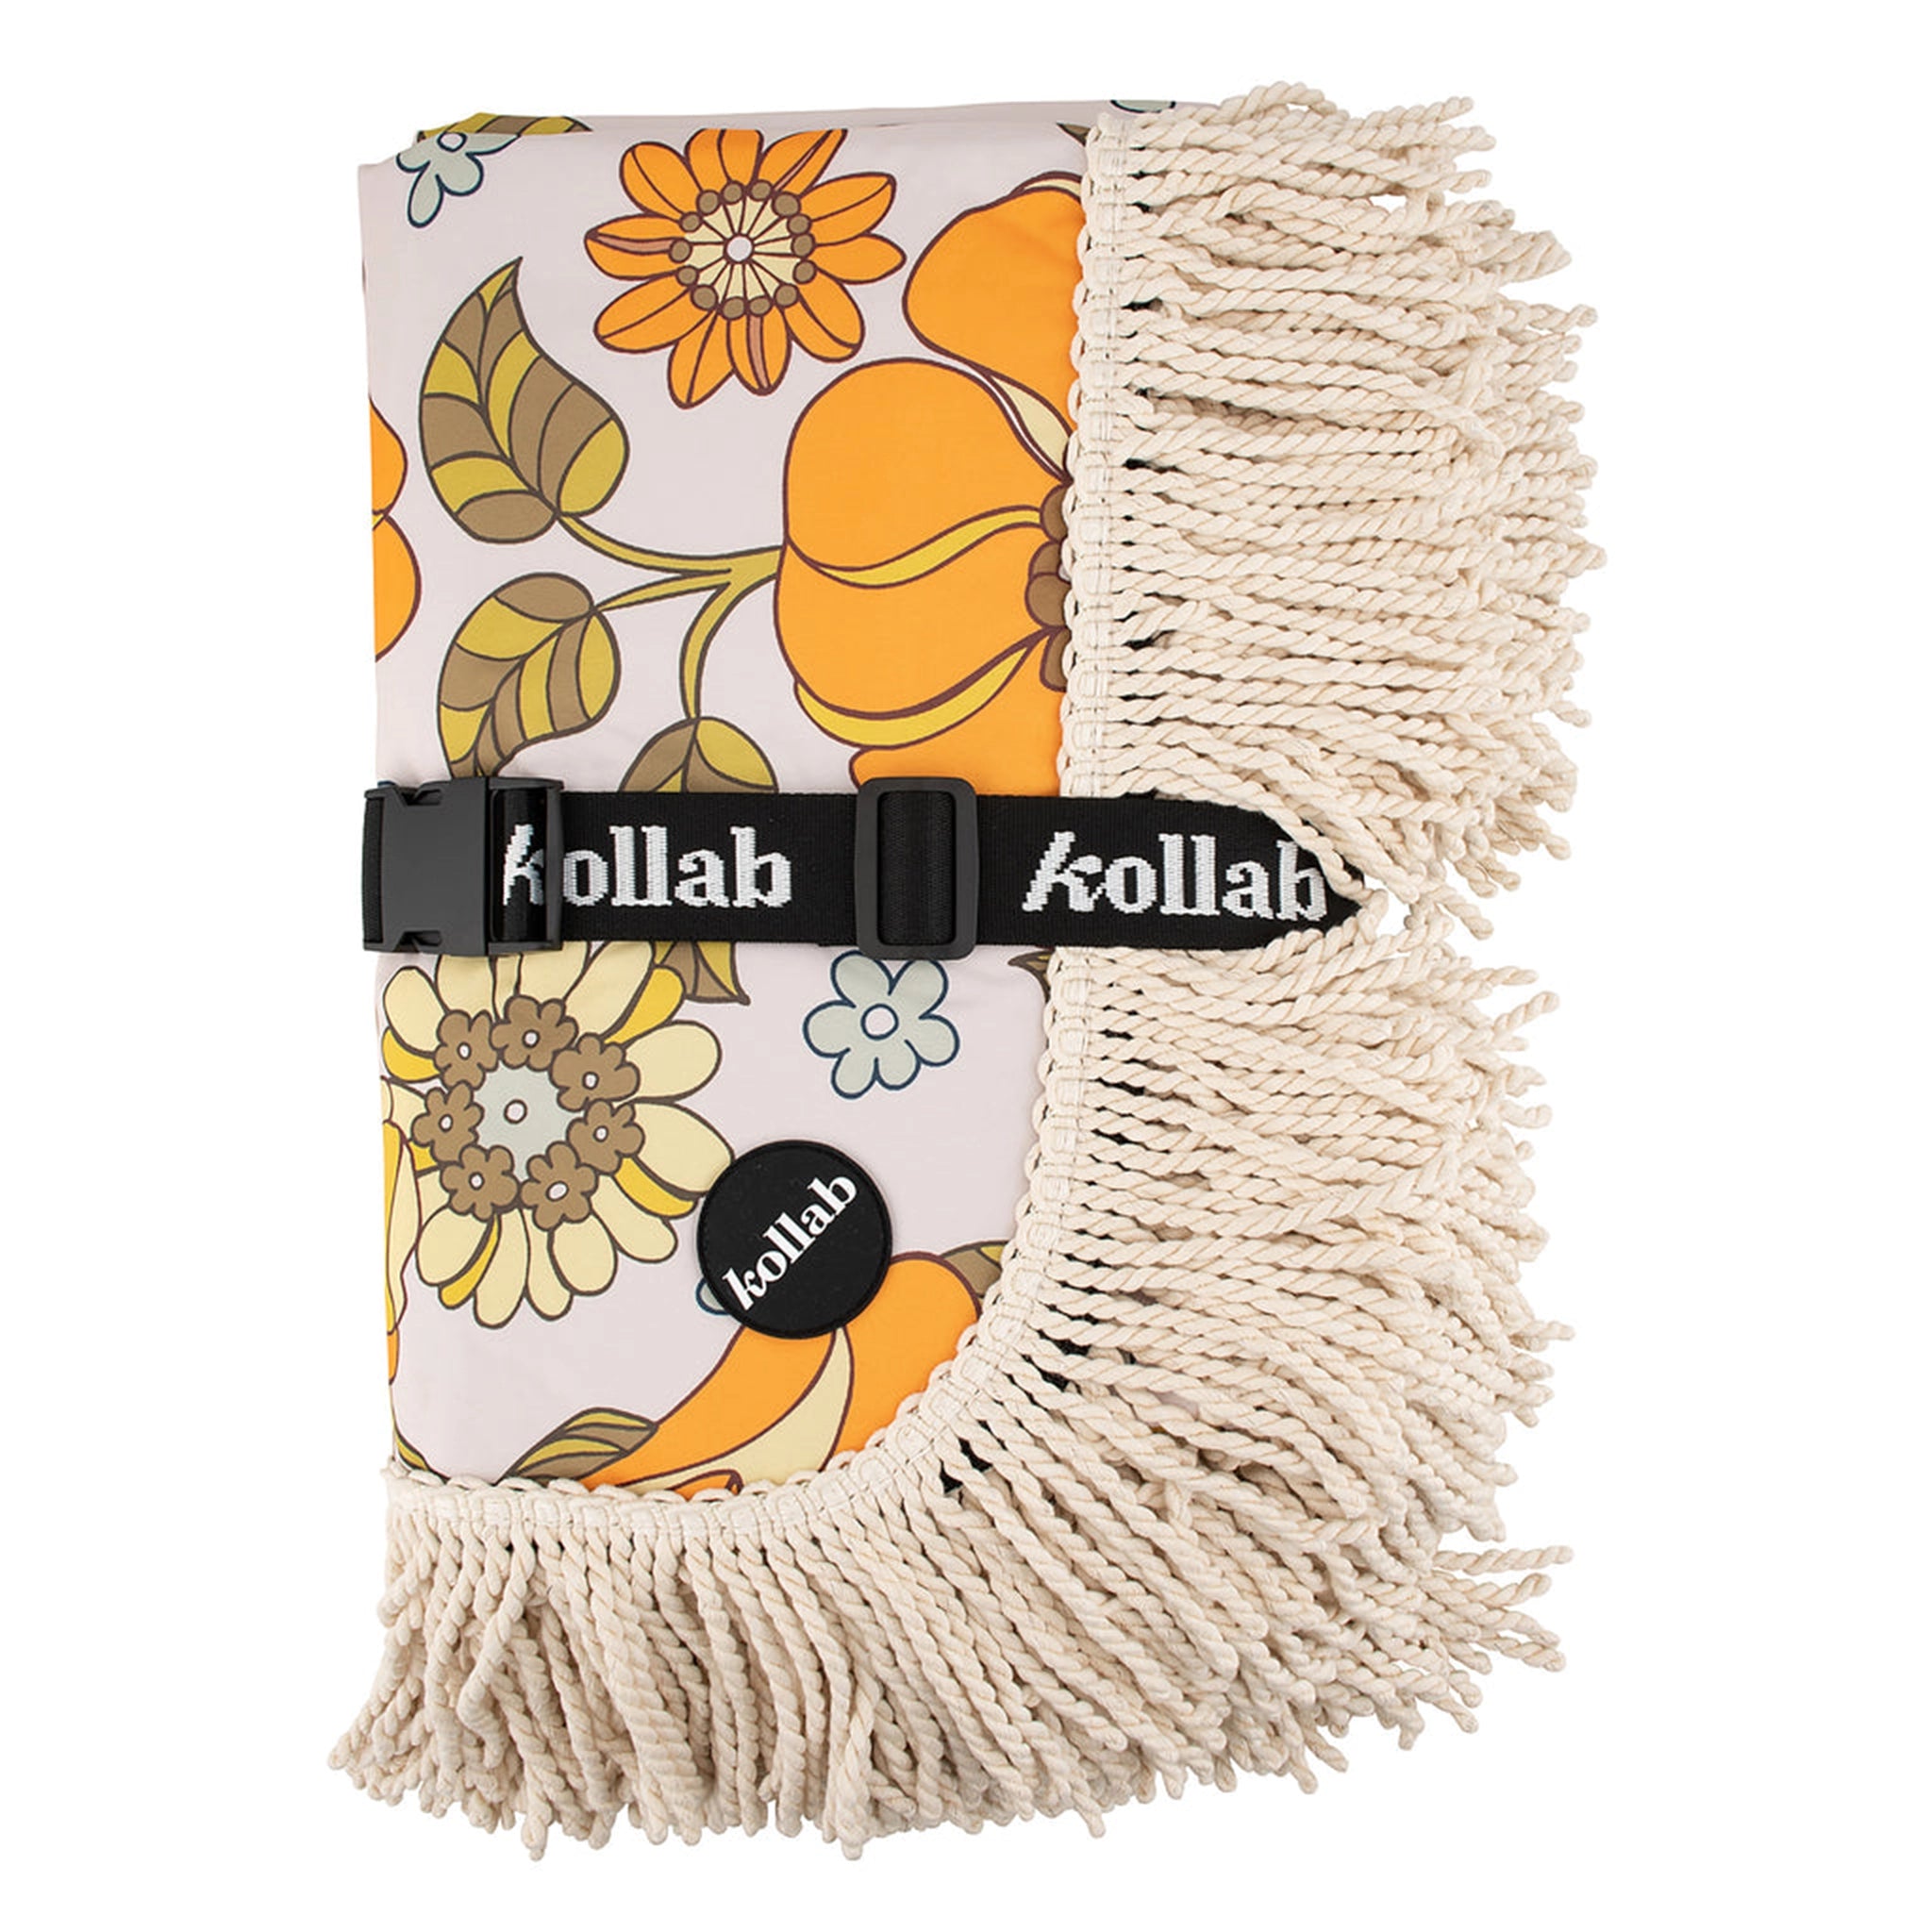 A 70's style yellow and orange floral picnic mat with cream fringe detailing around the edges.